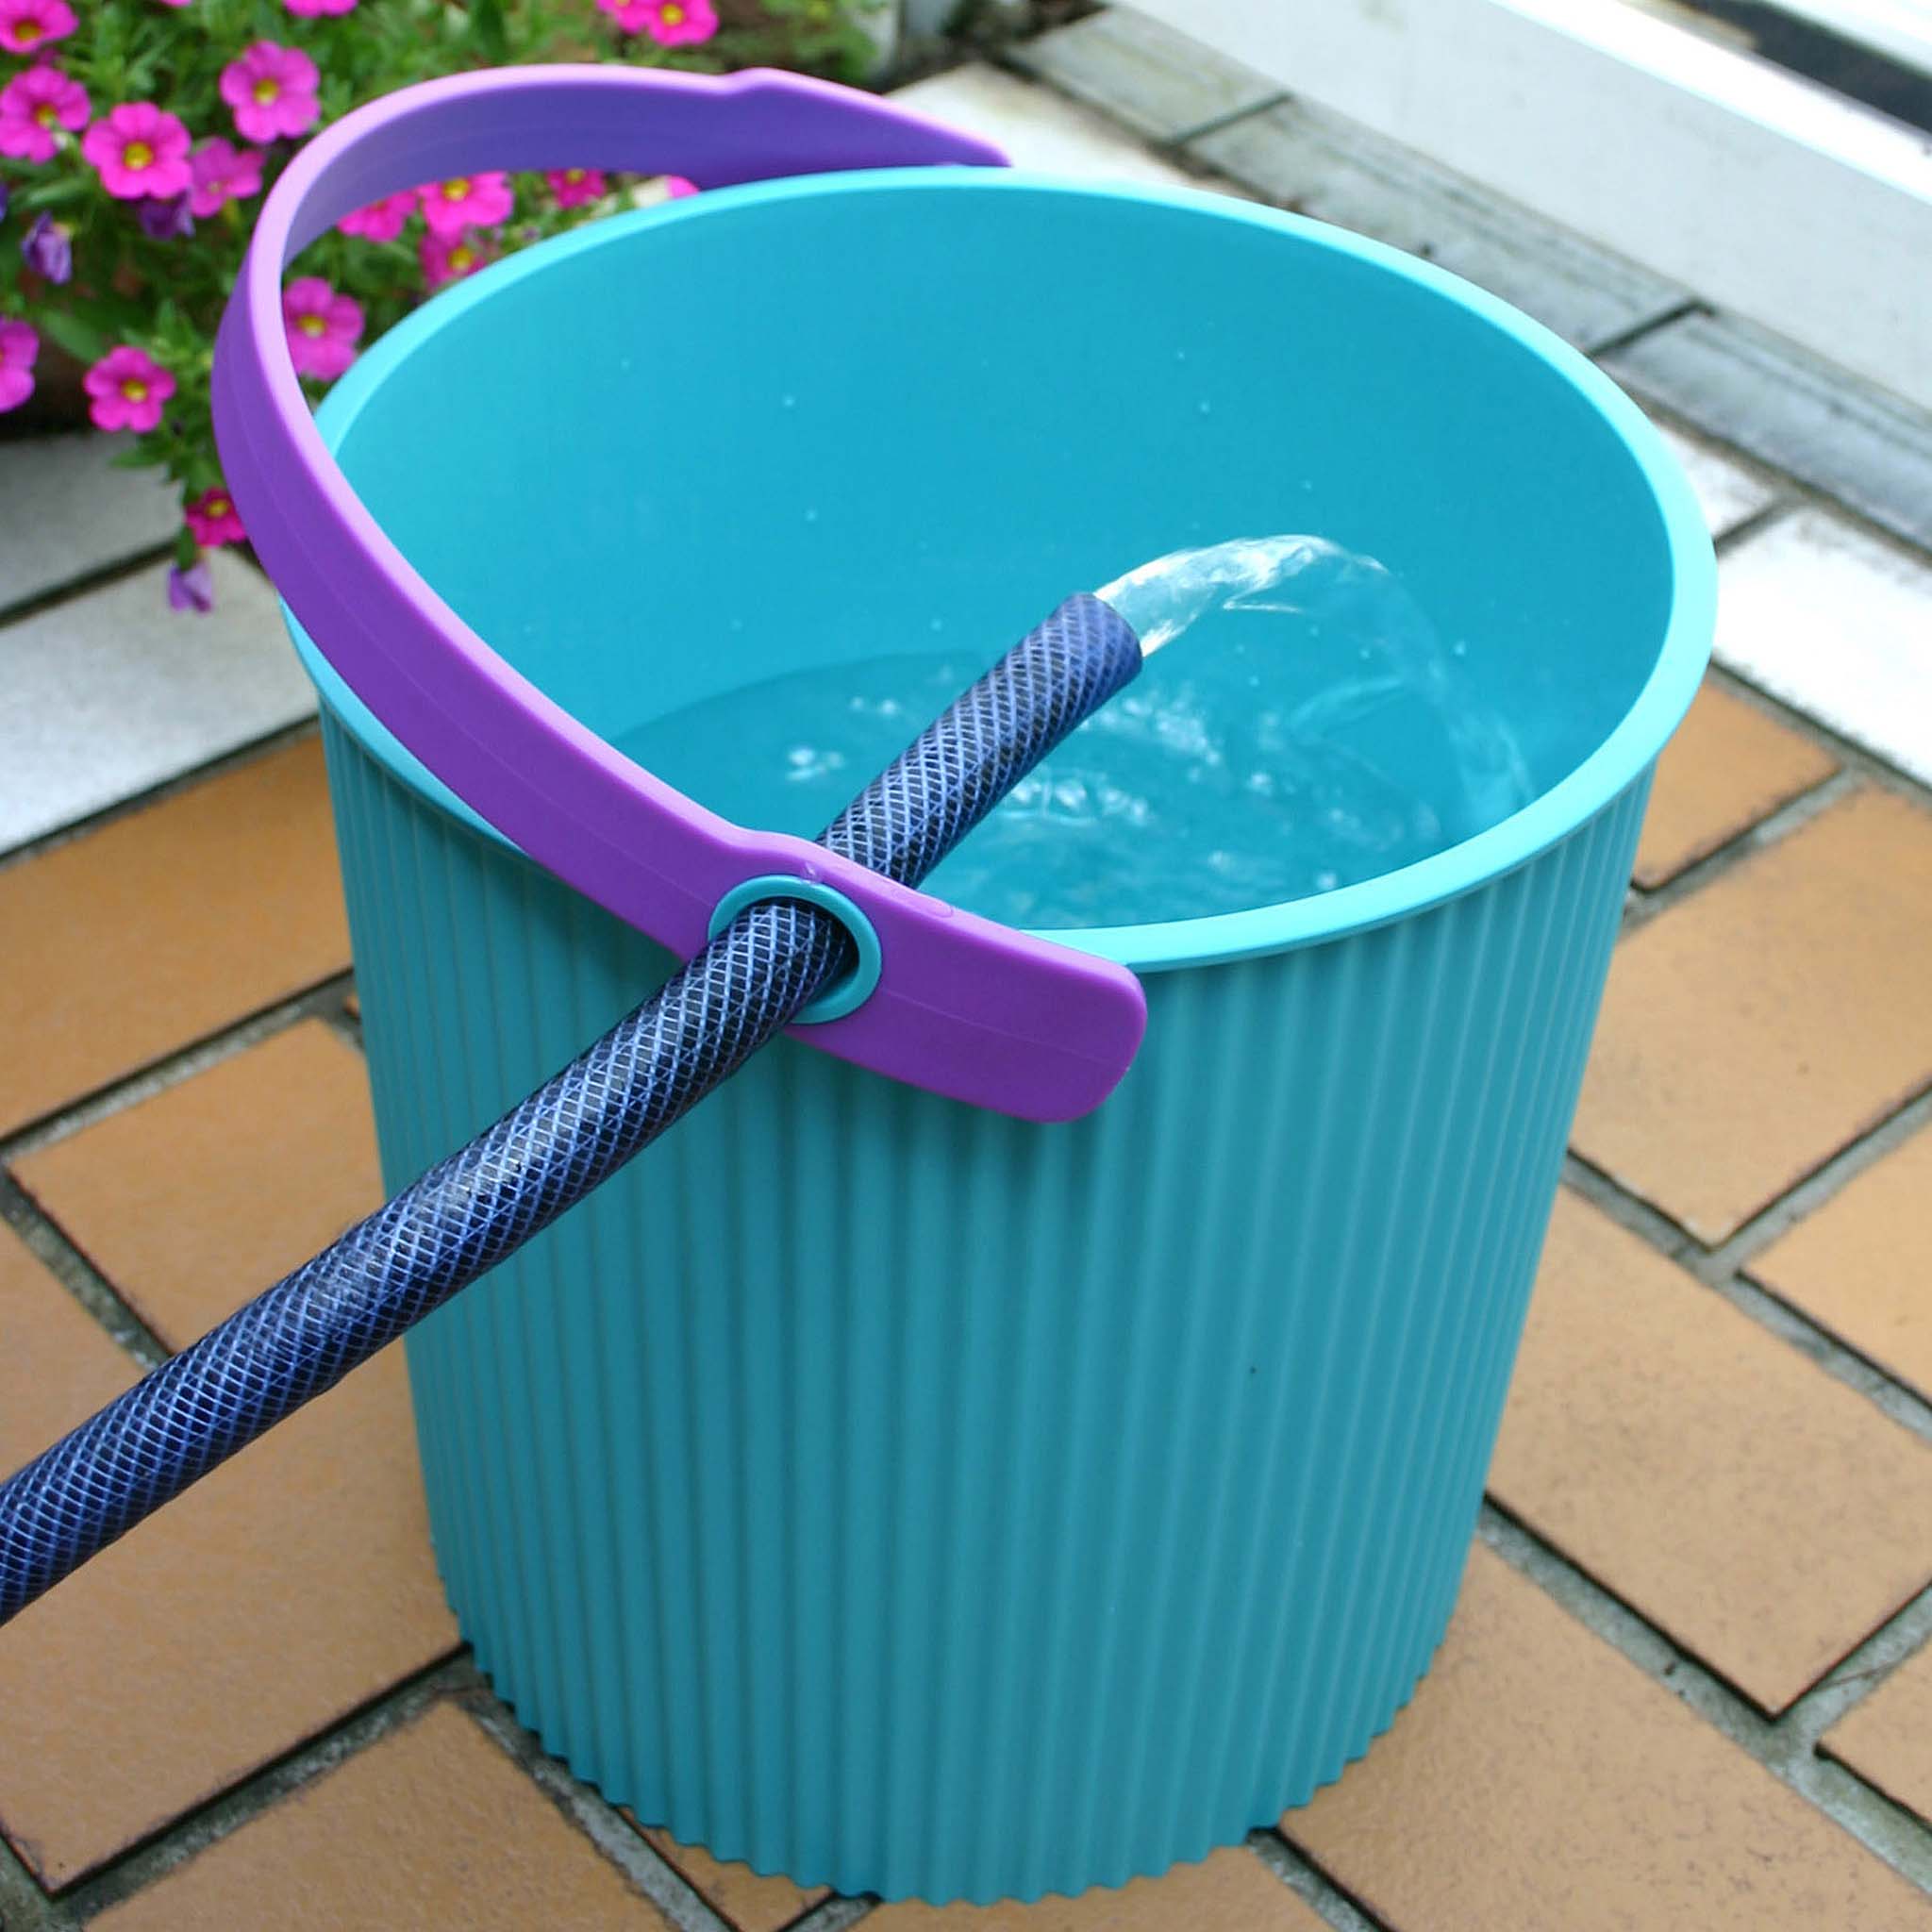 Omnioutil Vivid in turquoise blue. The color of the lid matches the handle, and the color of the bucket matches the ring (the hose hole).